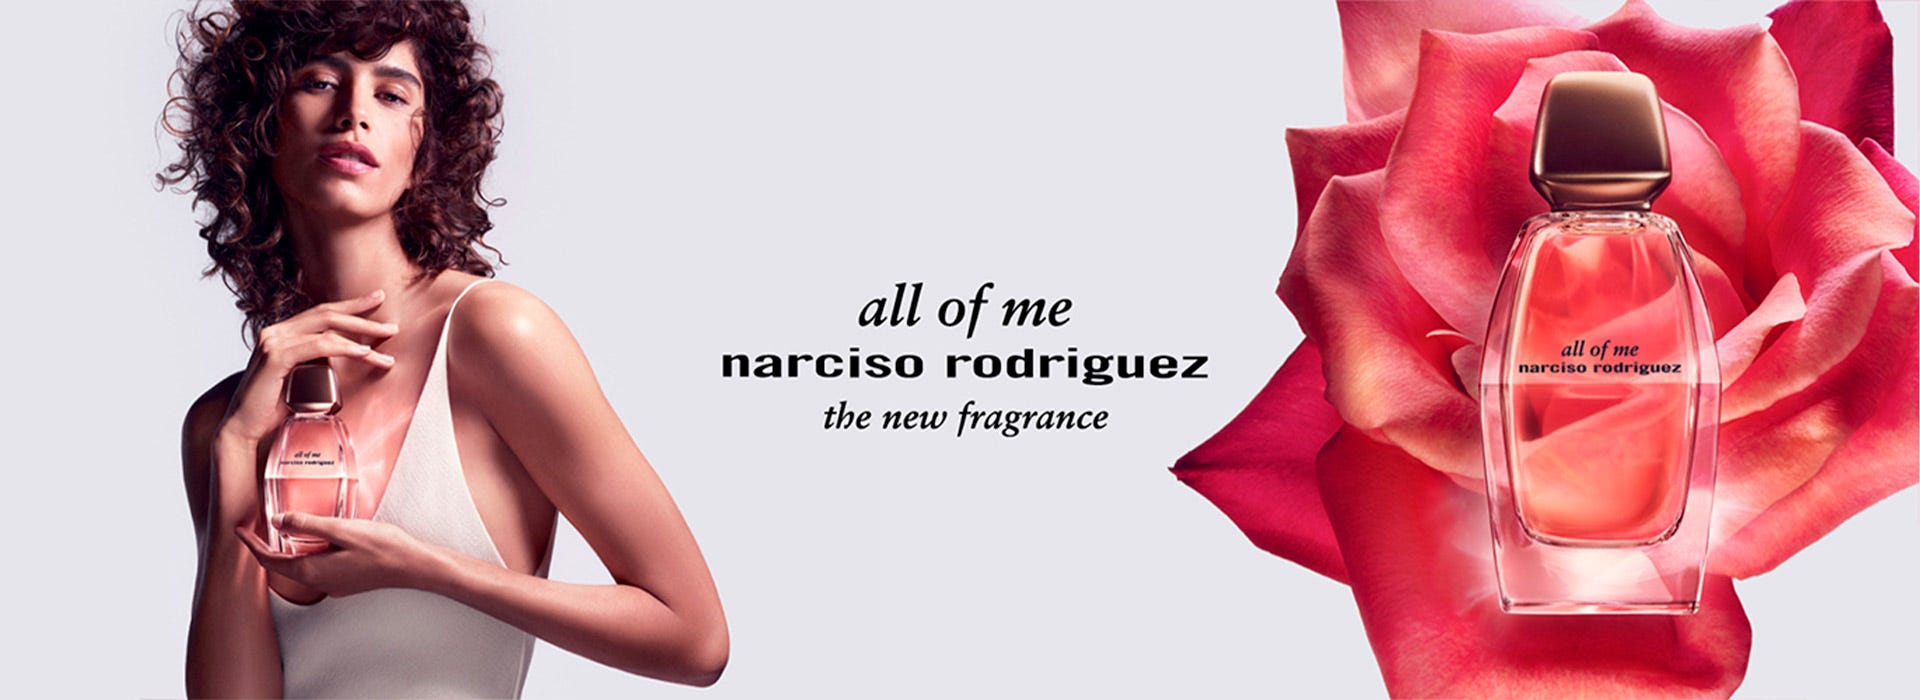 narciso rodriguez - All of me